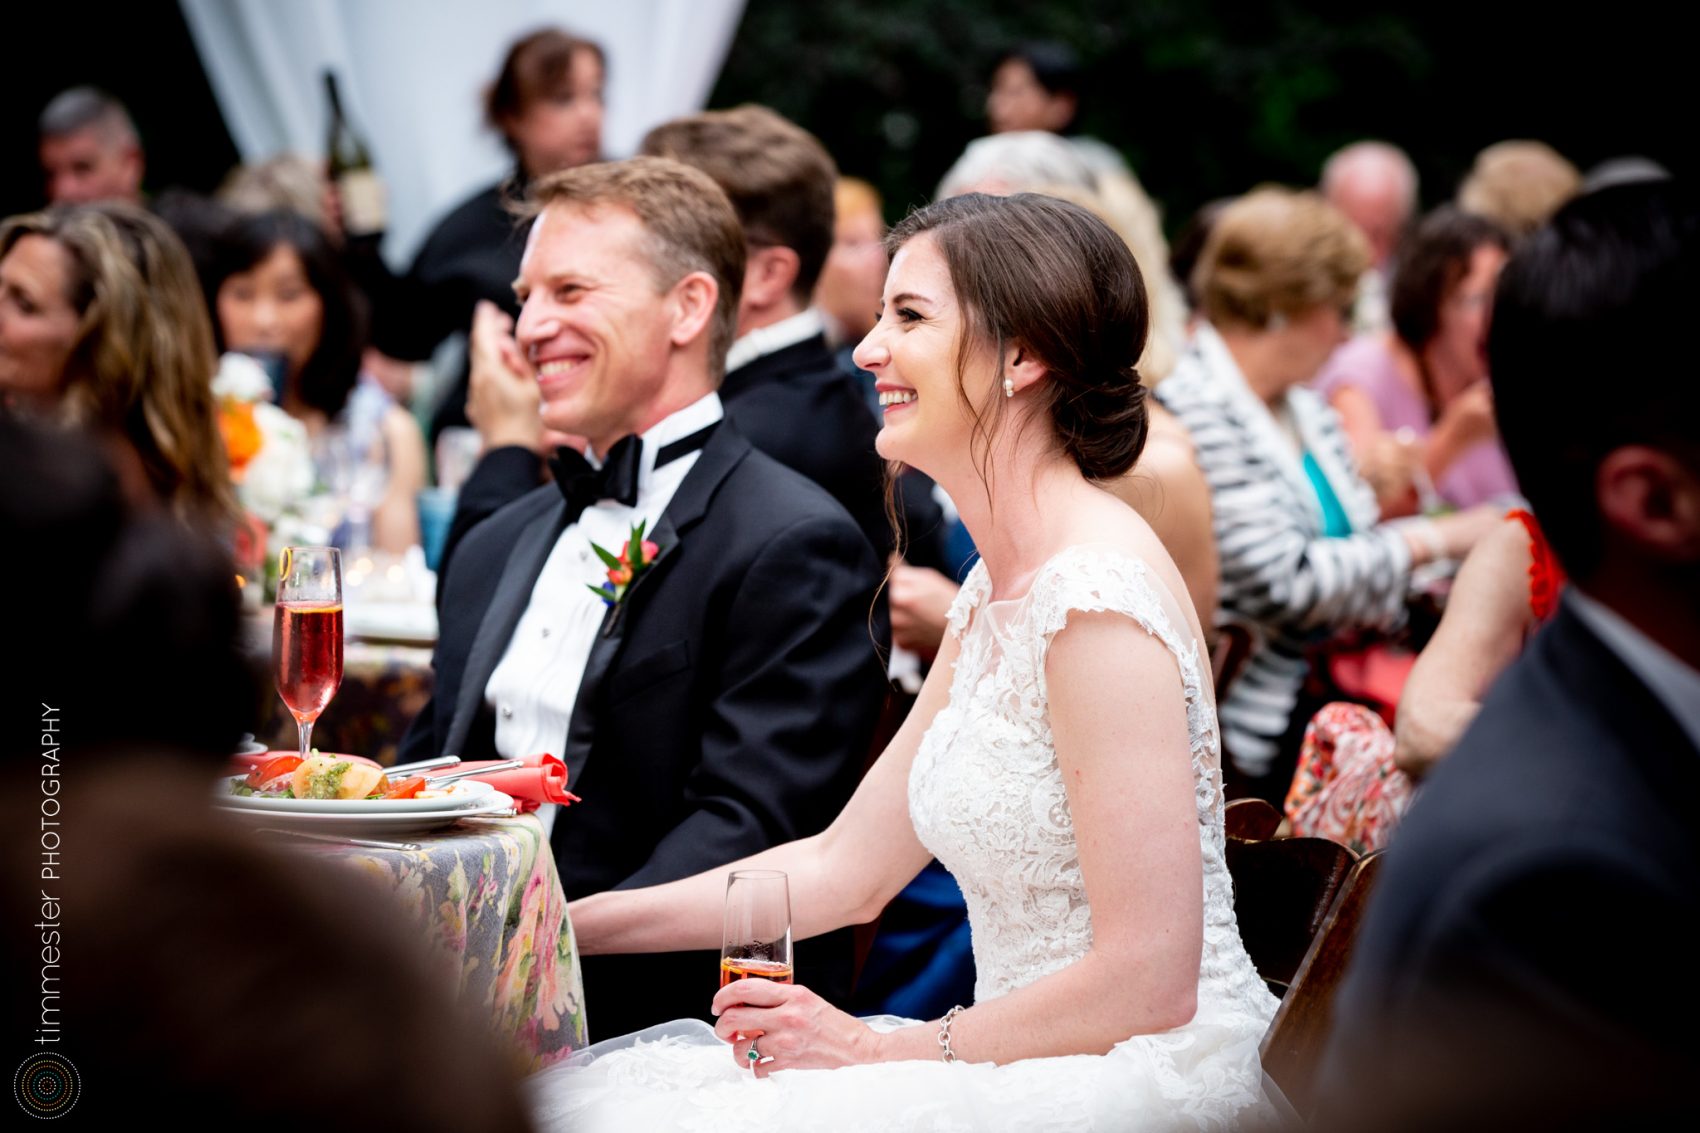 An outdoor wedding reception at a private home in McLean, Virginia, following a National Cathedral ceremony.